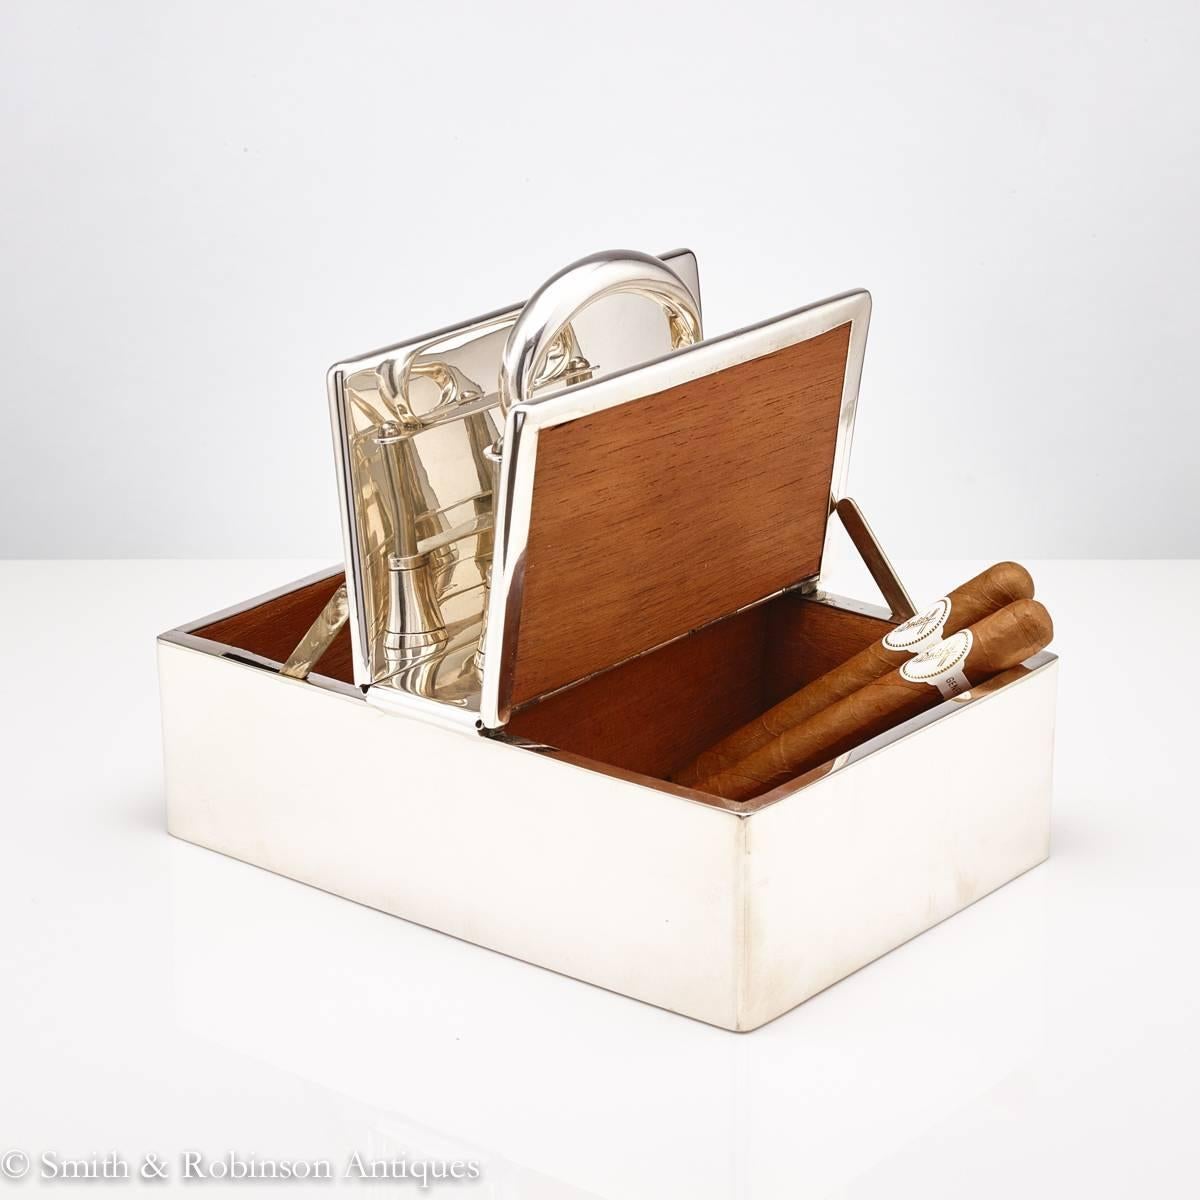 A great automated English silver cigar box, dated London, 1913 by maker Stuart Dawson & Co Ltd.

By pulling the upper part of the central handle the lids move upwards to reveal the two cedar wood interior compartments.
Also the box can be carried